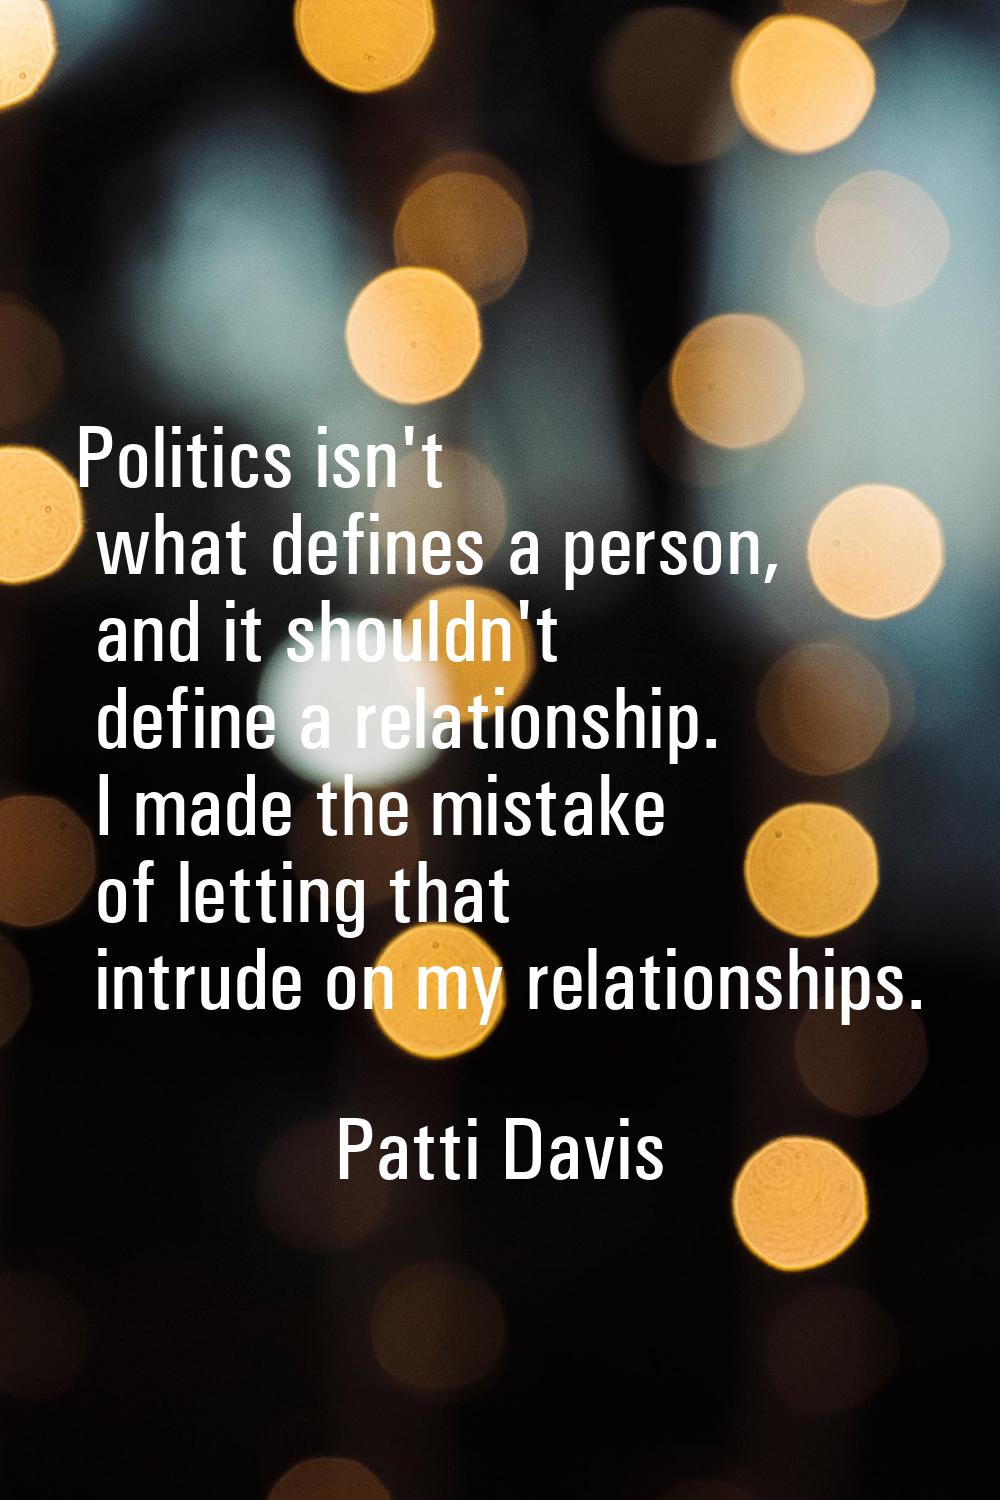 Politics isn't what defines a person, and it shouldn't define a relationship. I made the mistake of